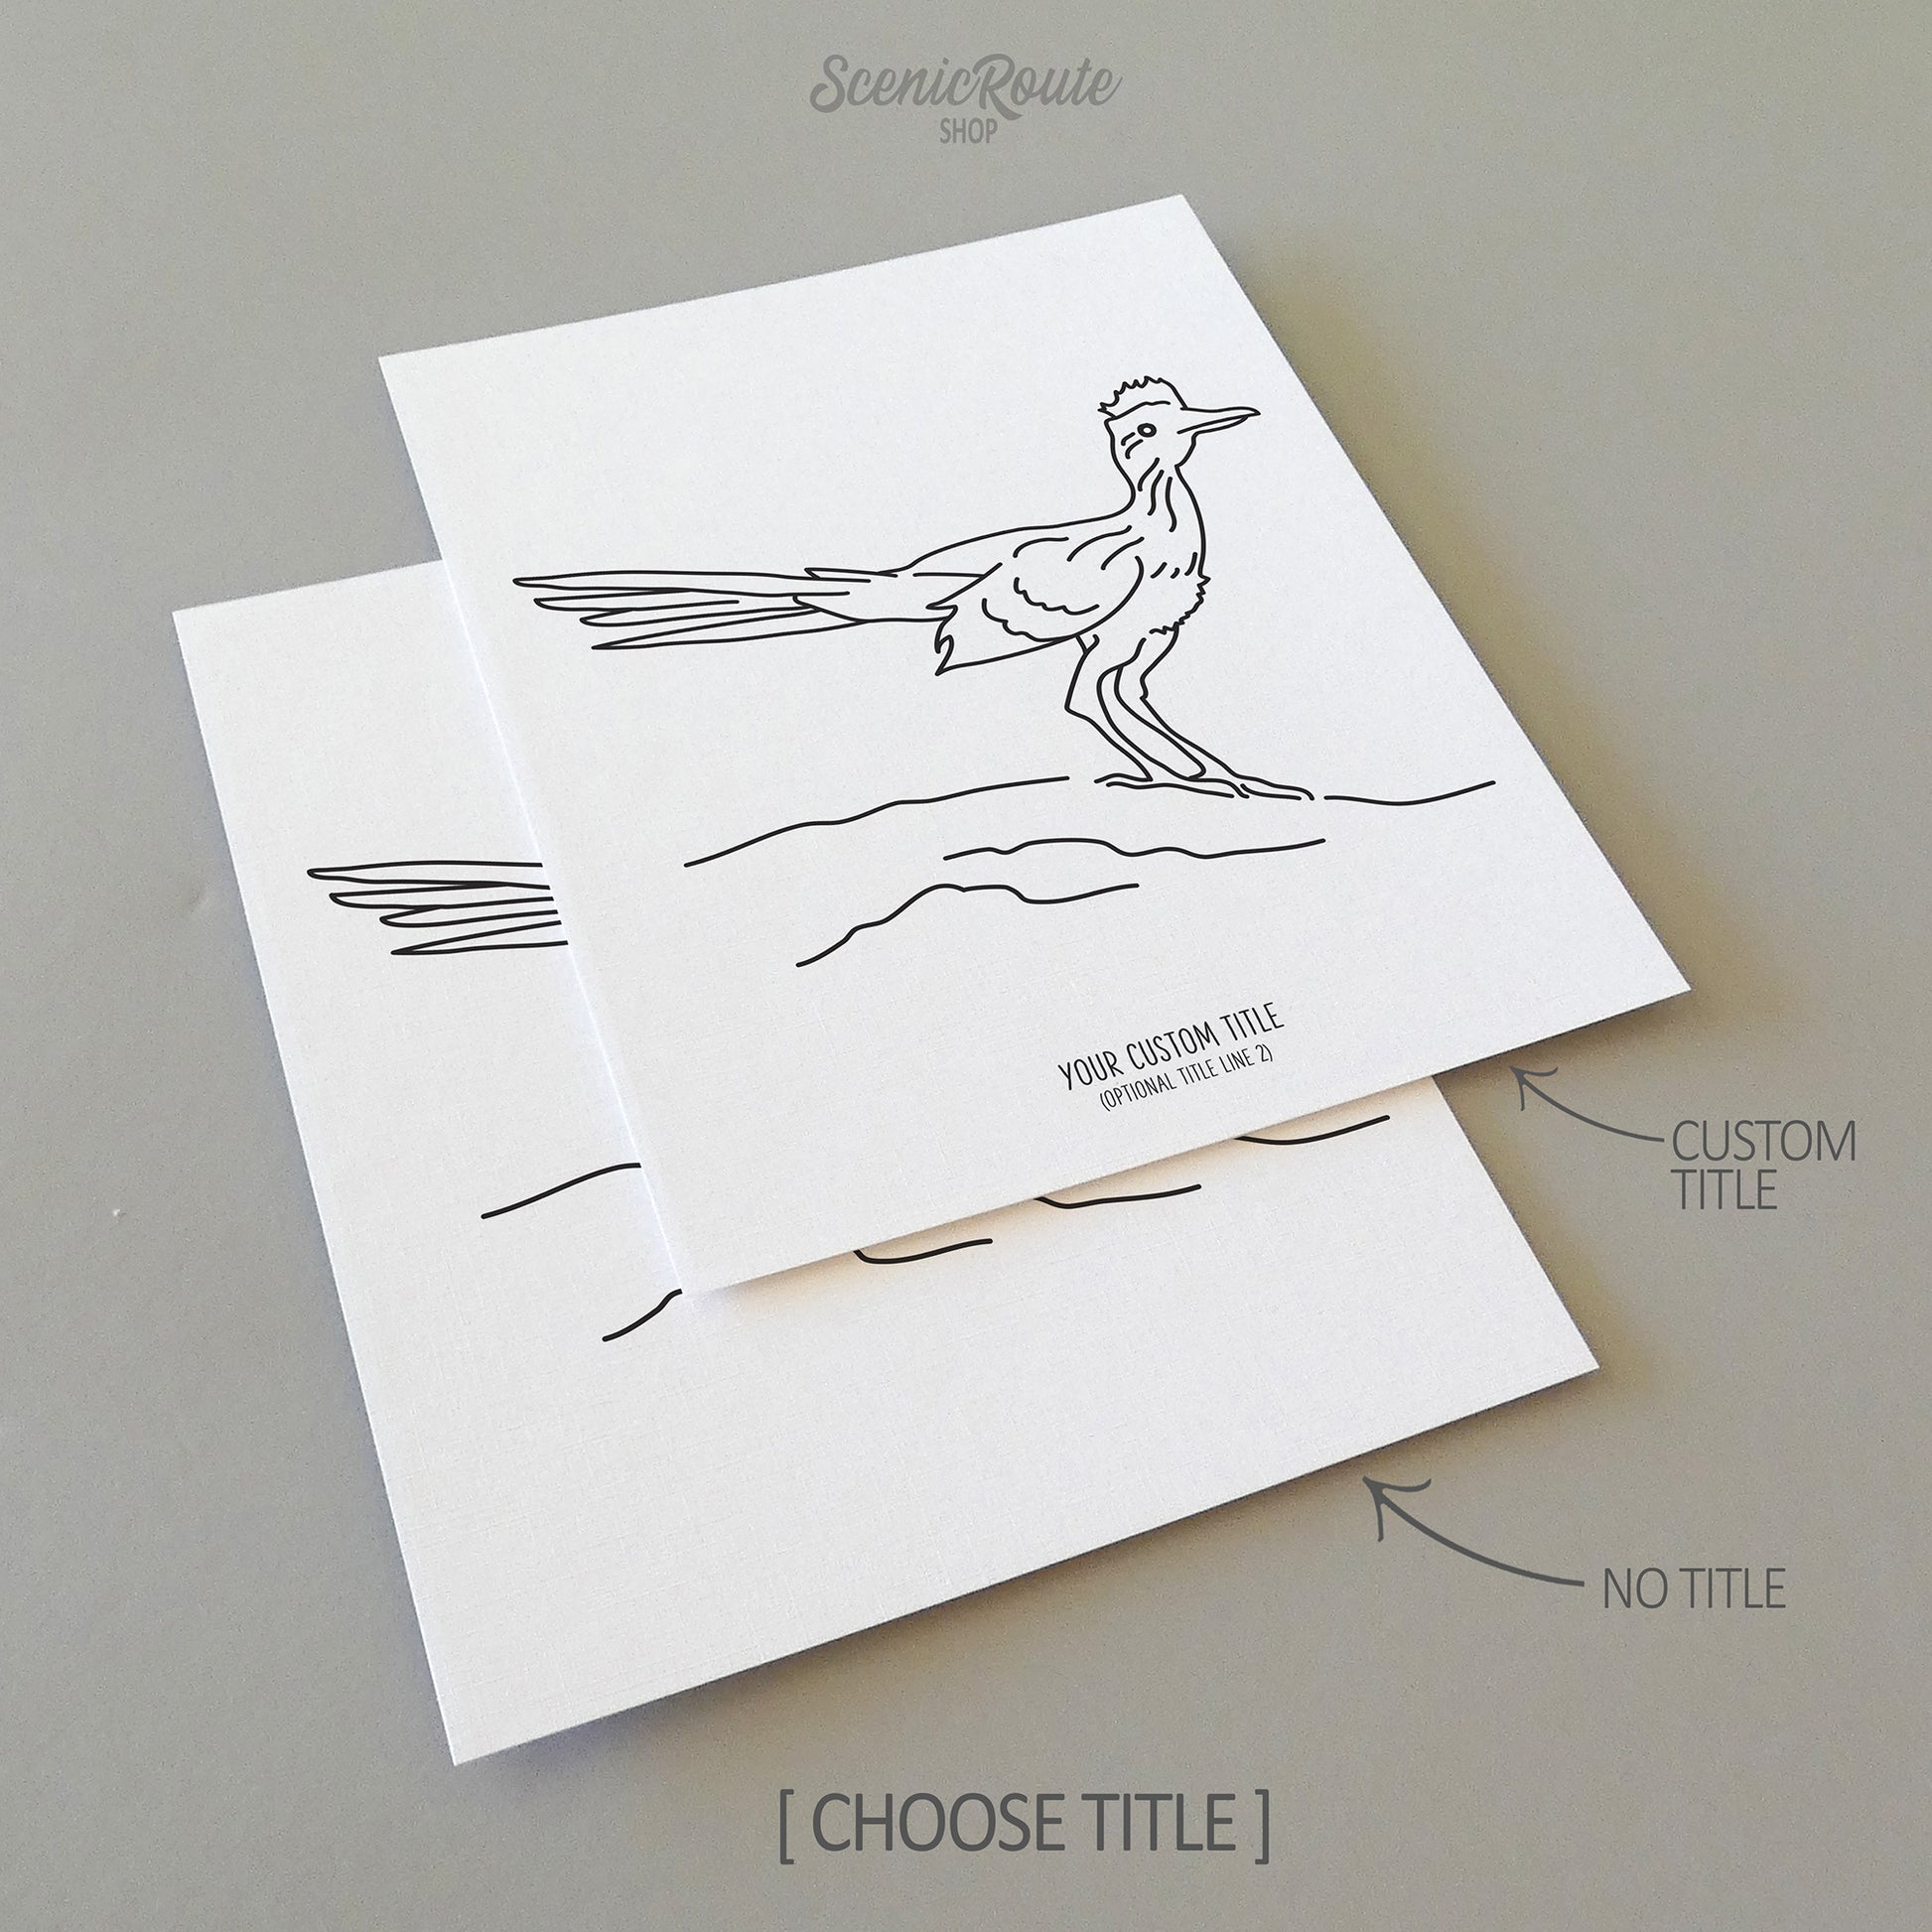 Two line art drawings of a Roadrunner Bird on white linen paper with a gray background.  The pieces are shown with “No Title” and “Custom Title” options for the available art print options.